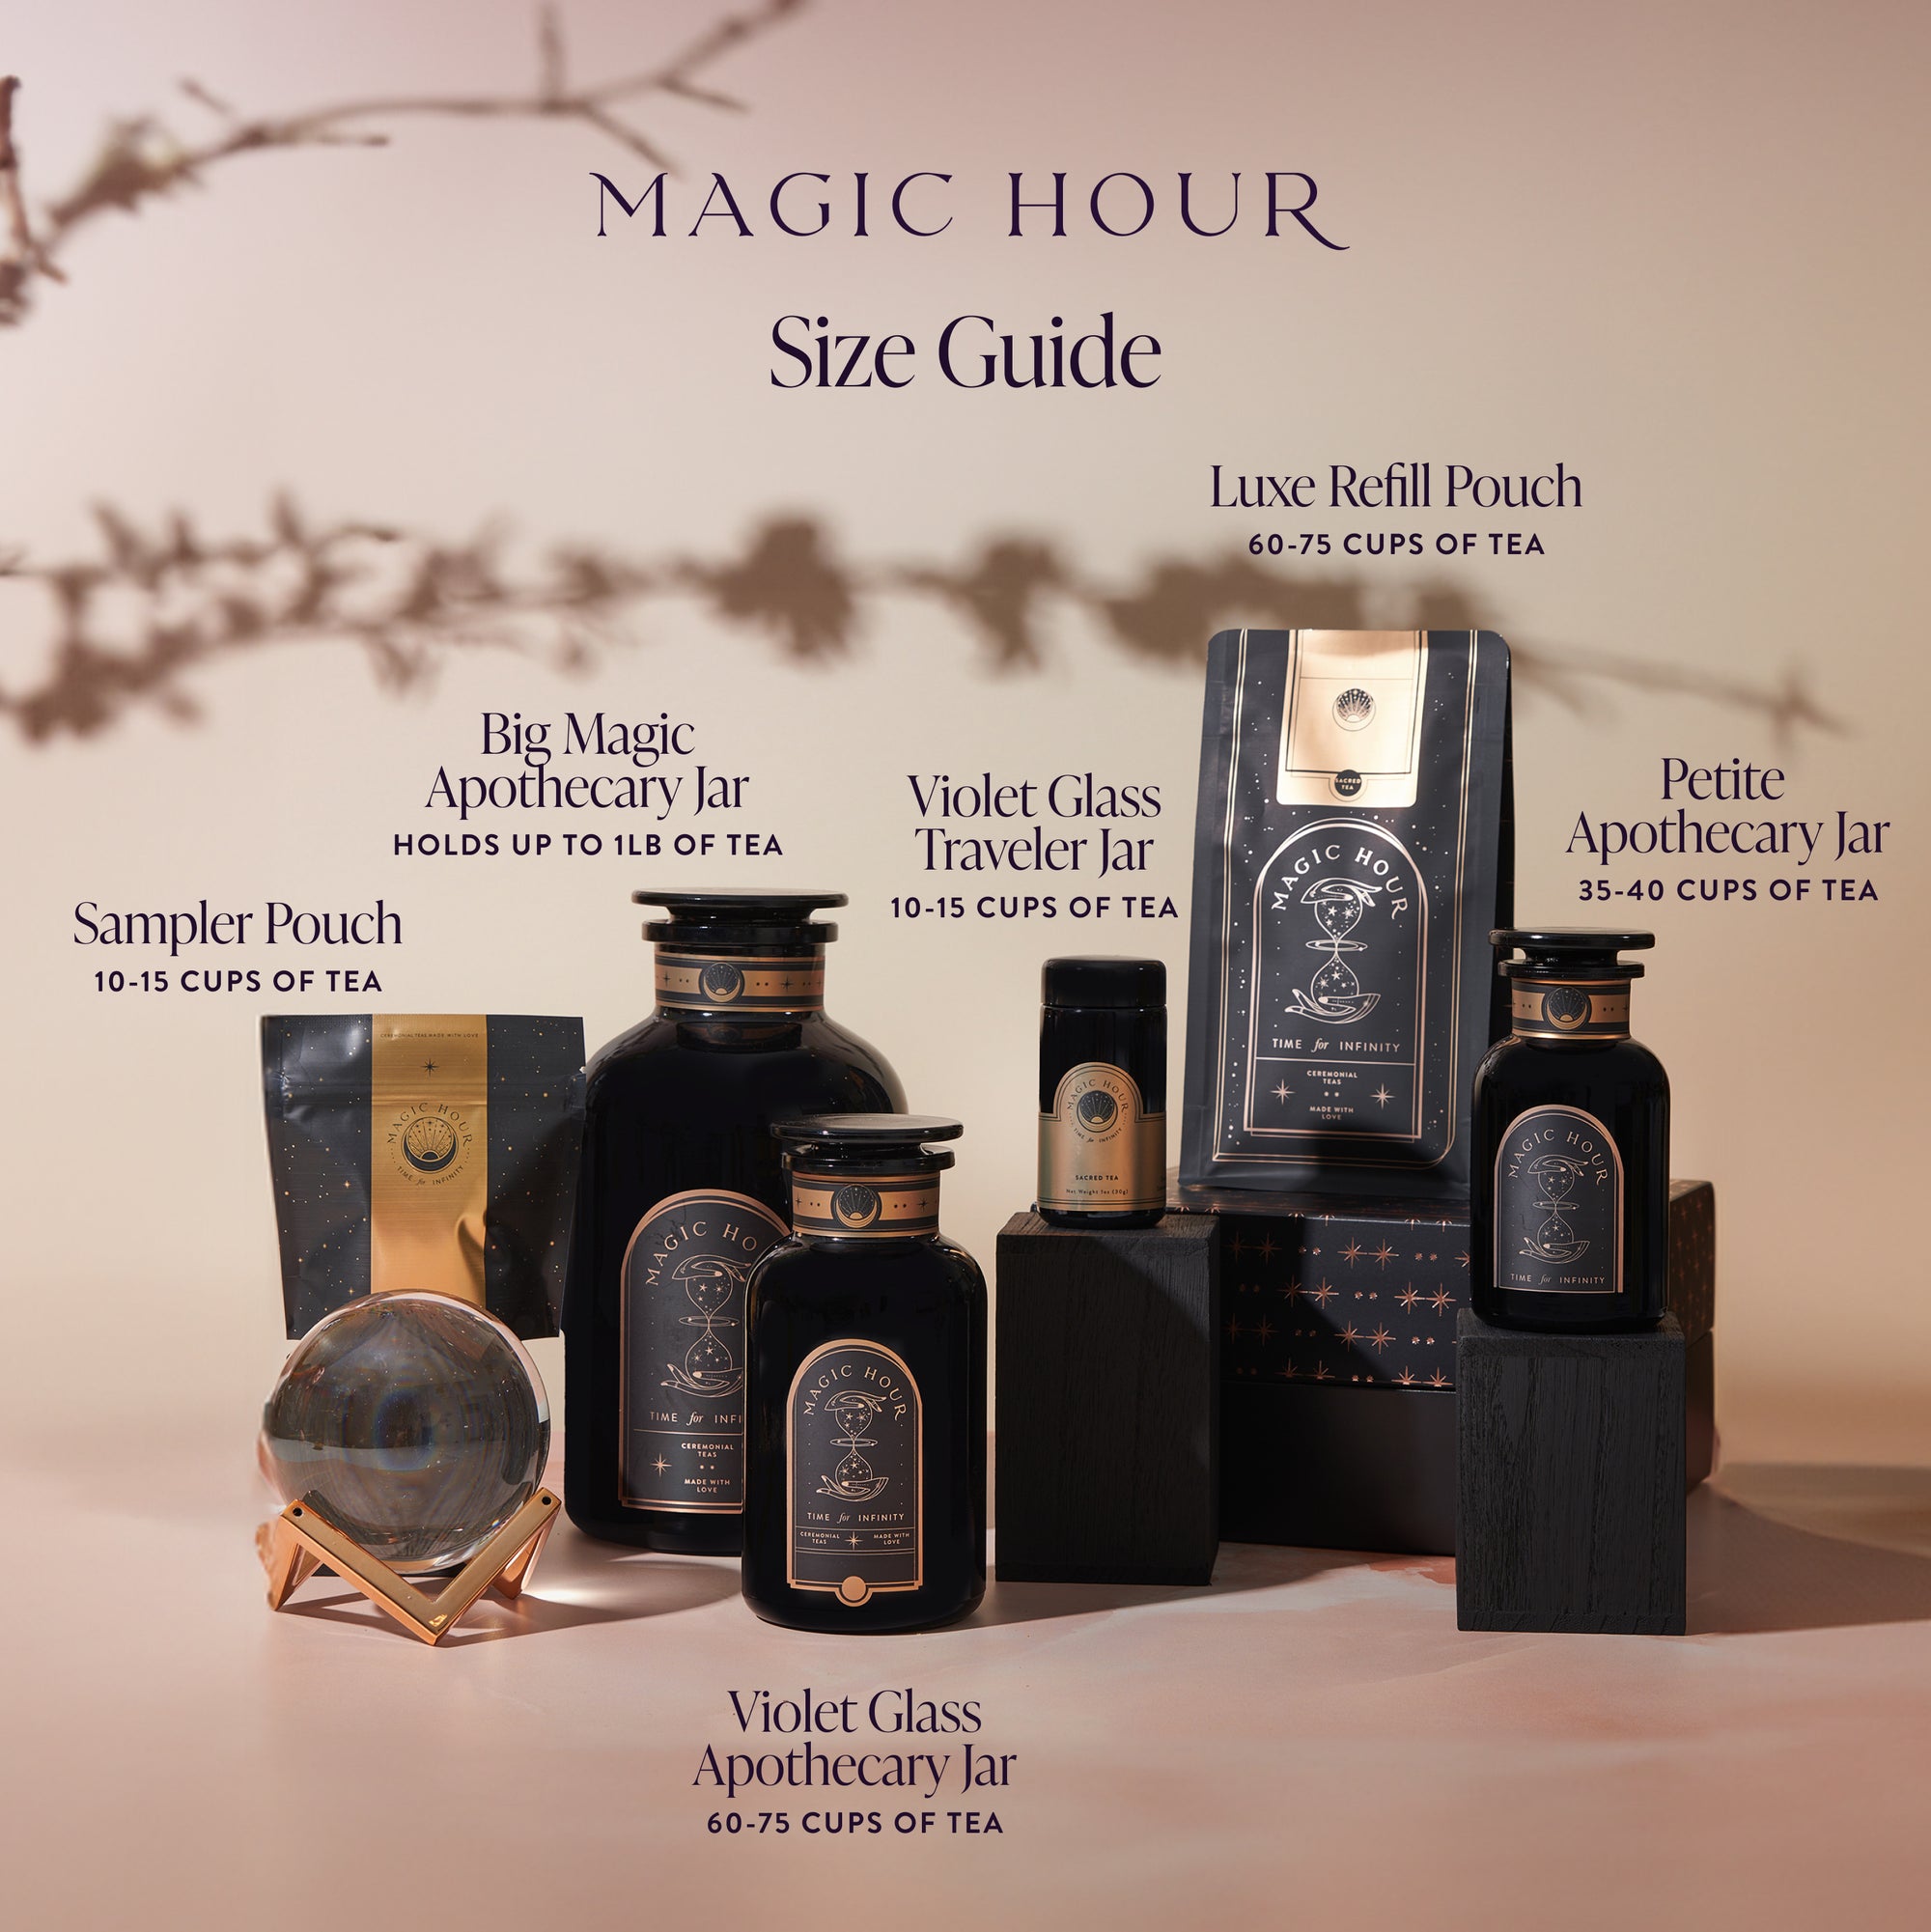 A promotional image for Magic Hour, showcasing various packaging sizes of their Almond Matcha Green Tea for Joy. The collection includes the Luxe Refill Pouch (60-75 cups), Big Magic Apothecary Jar (up to 1 lb or 60-75 cups), Violet Glass Traveler Jar (10-15 cups), Sampler Pouch (10-15 cups), Petite Apothecary Jar (35